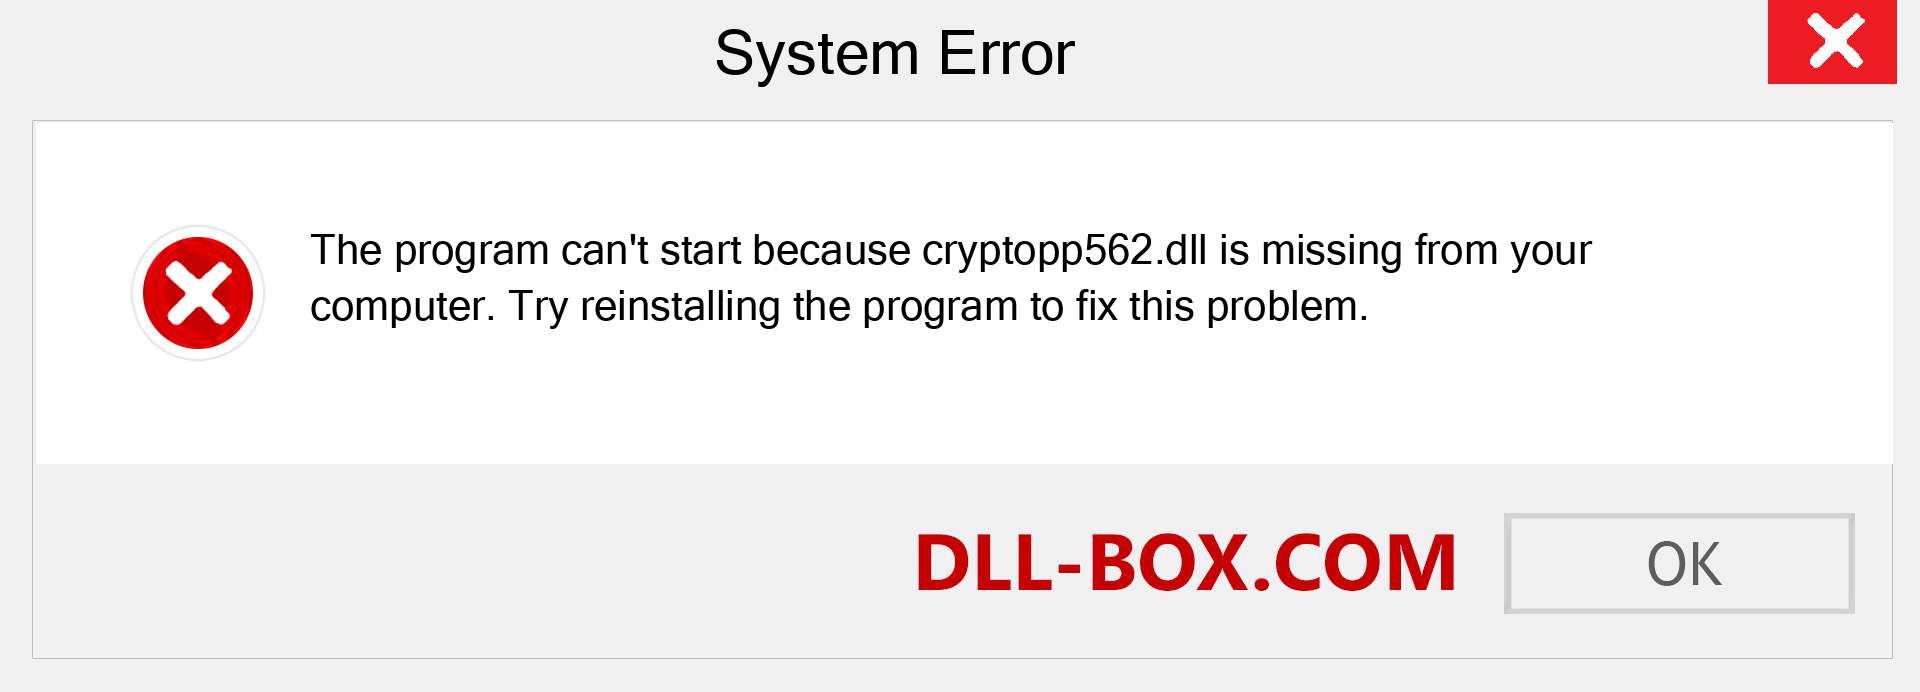  cryptopp562.dll file is missing?. Download for Windows 7, 8, 10 - Fix  cryptopp562 dll Missing Error on Windows, photos, images